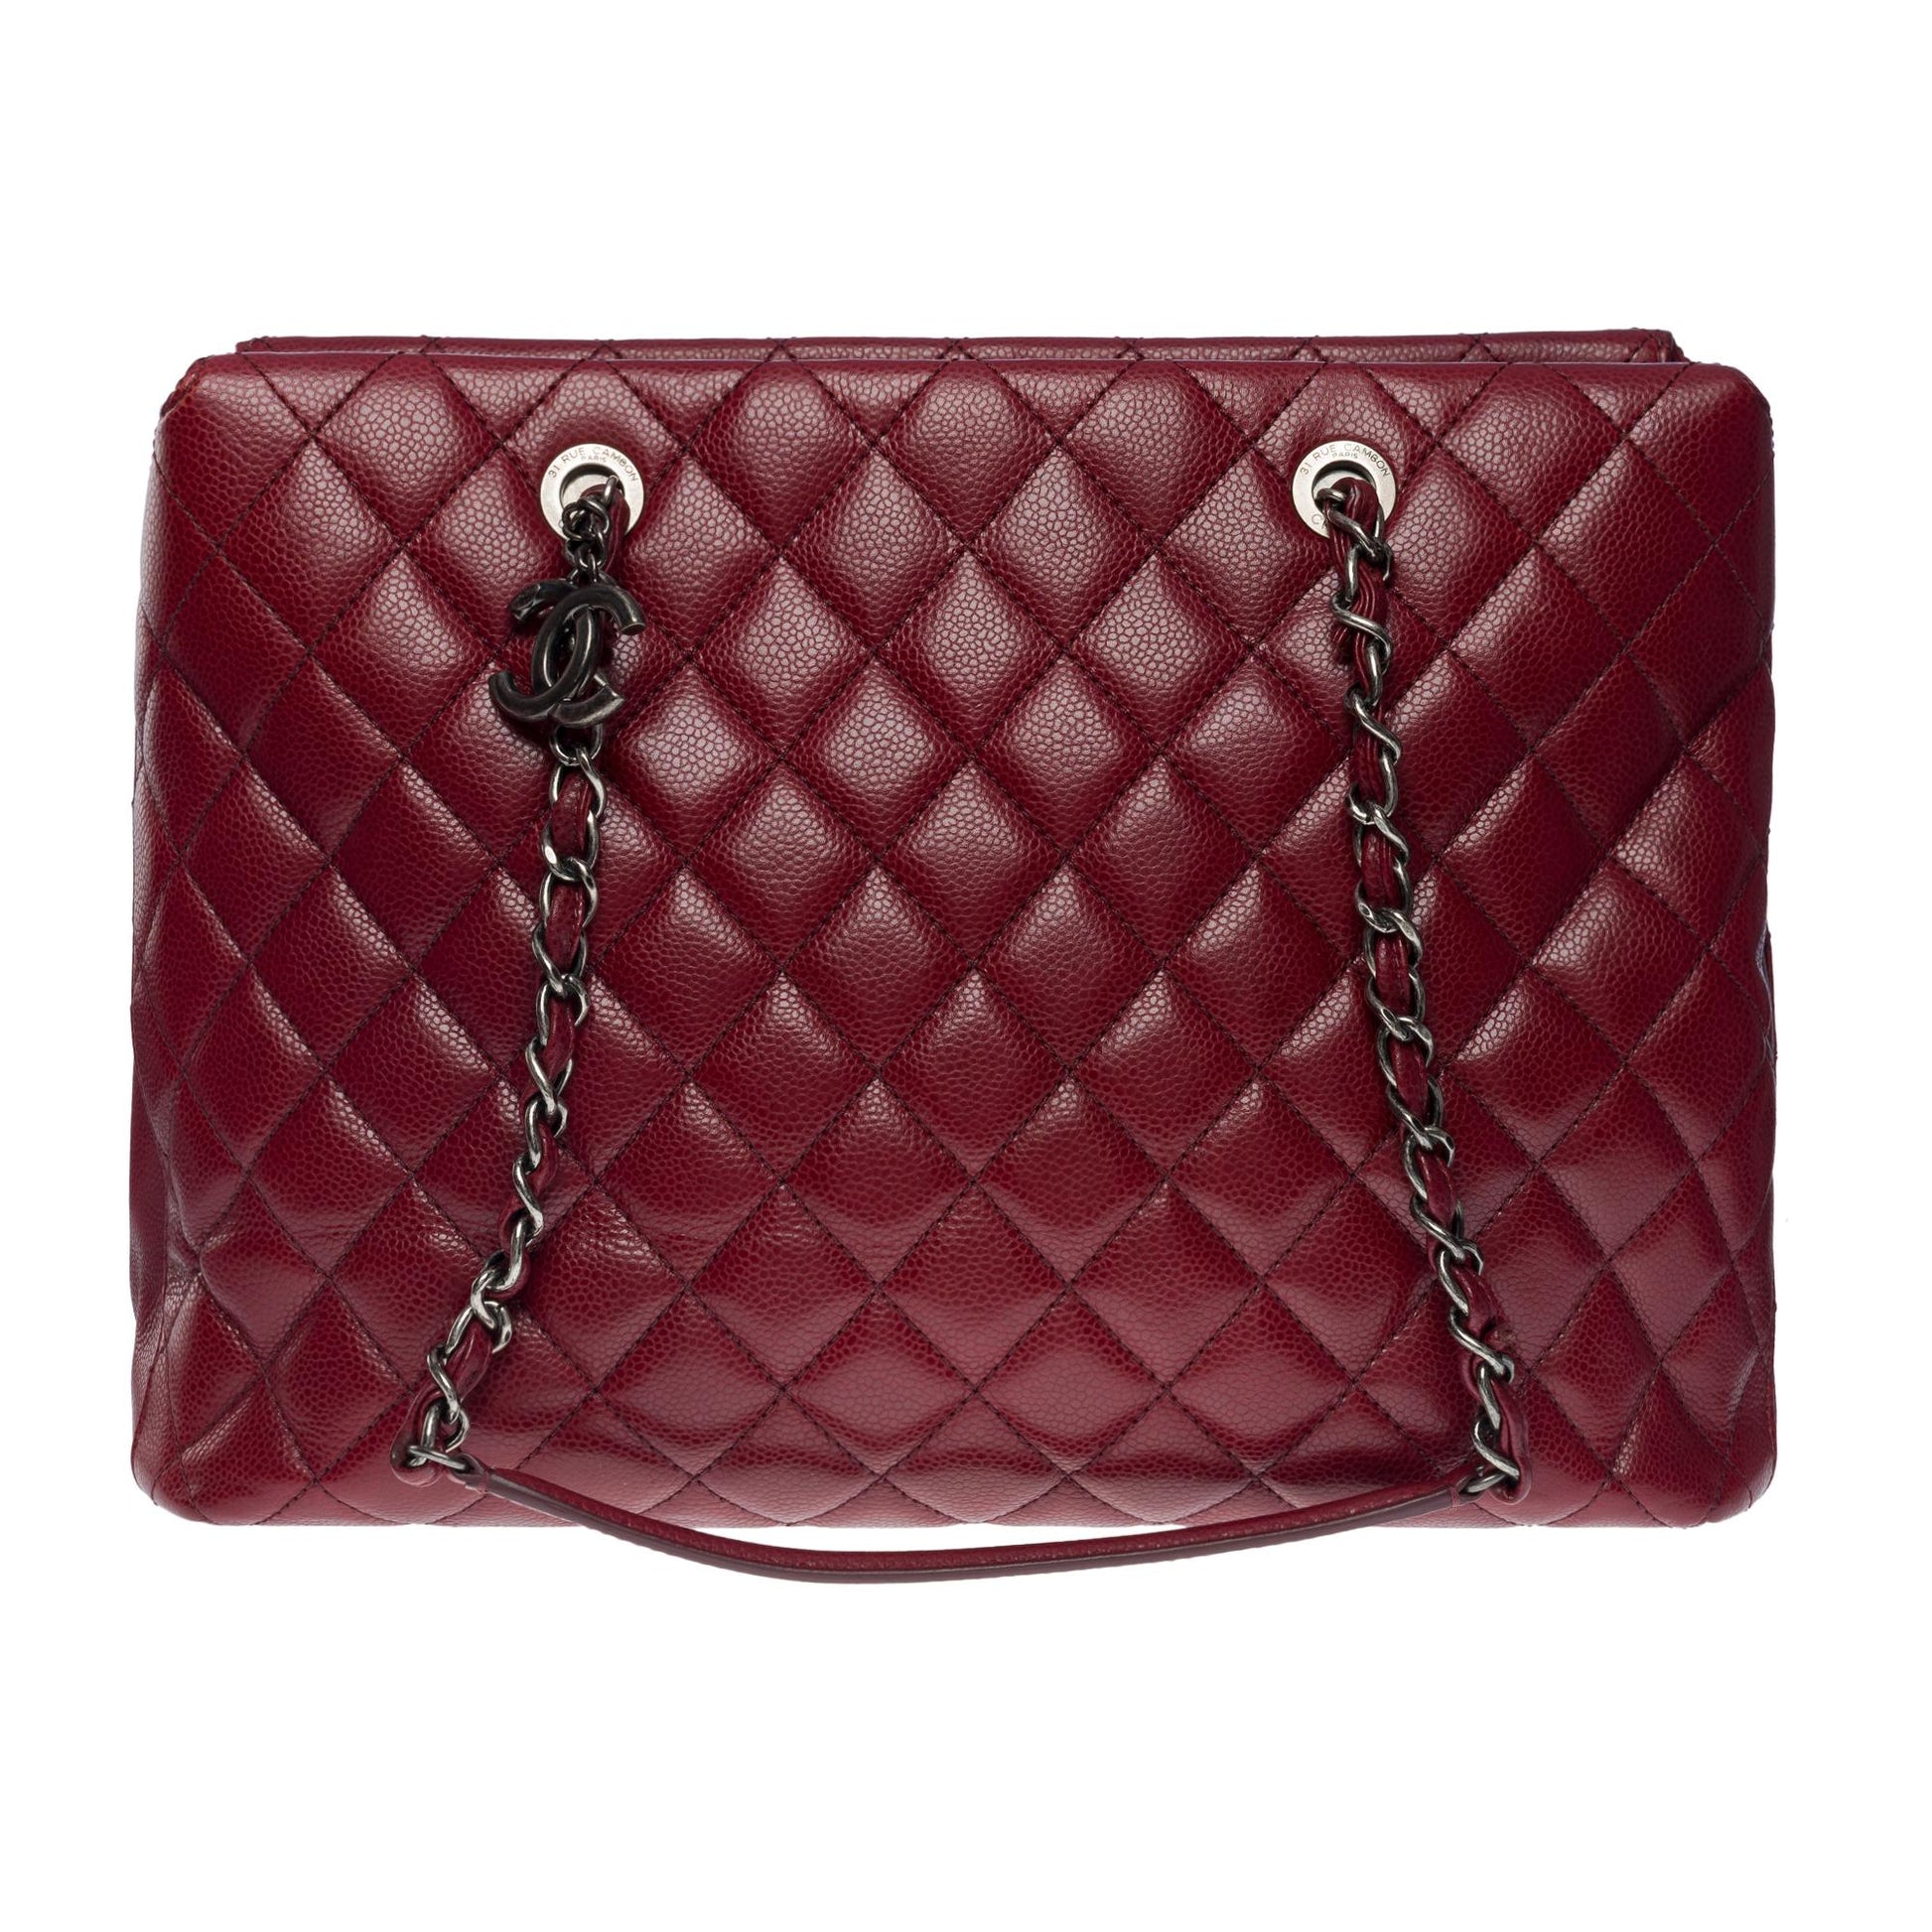 Chanel Shopping Tote in Burgundy - More Than You Can Imagine